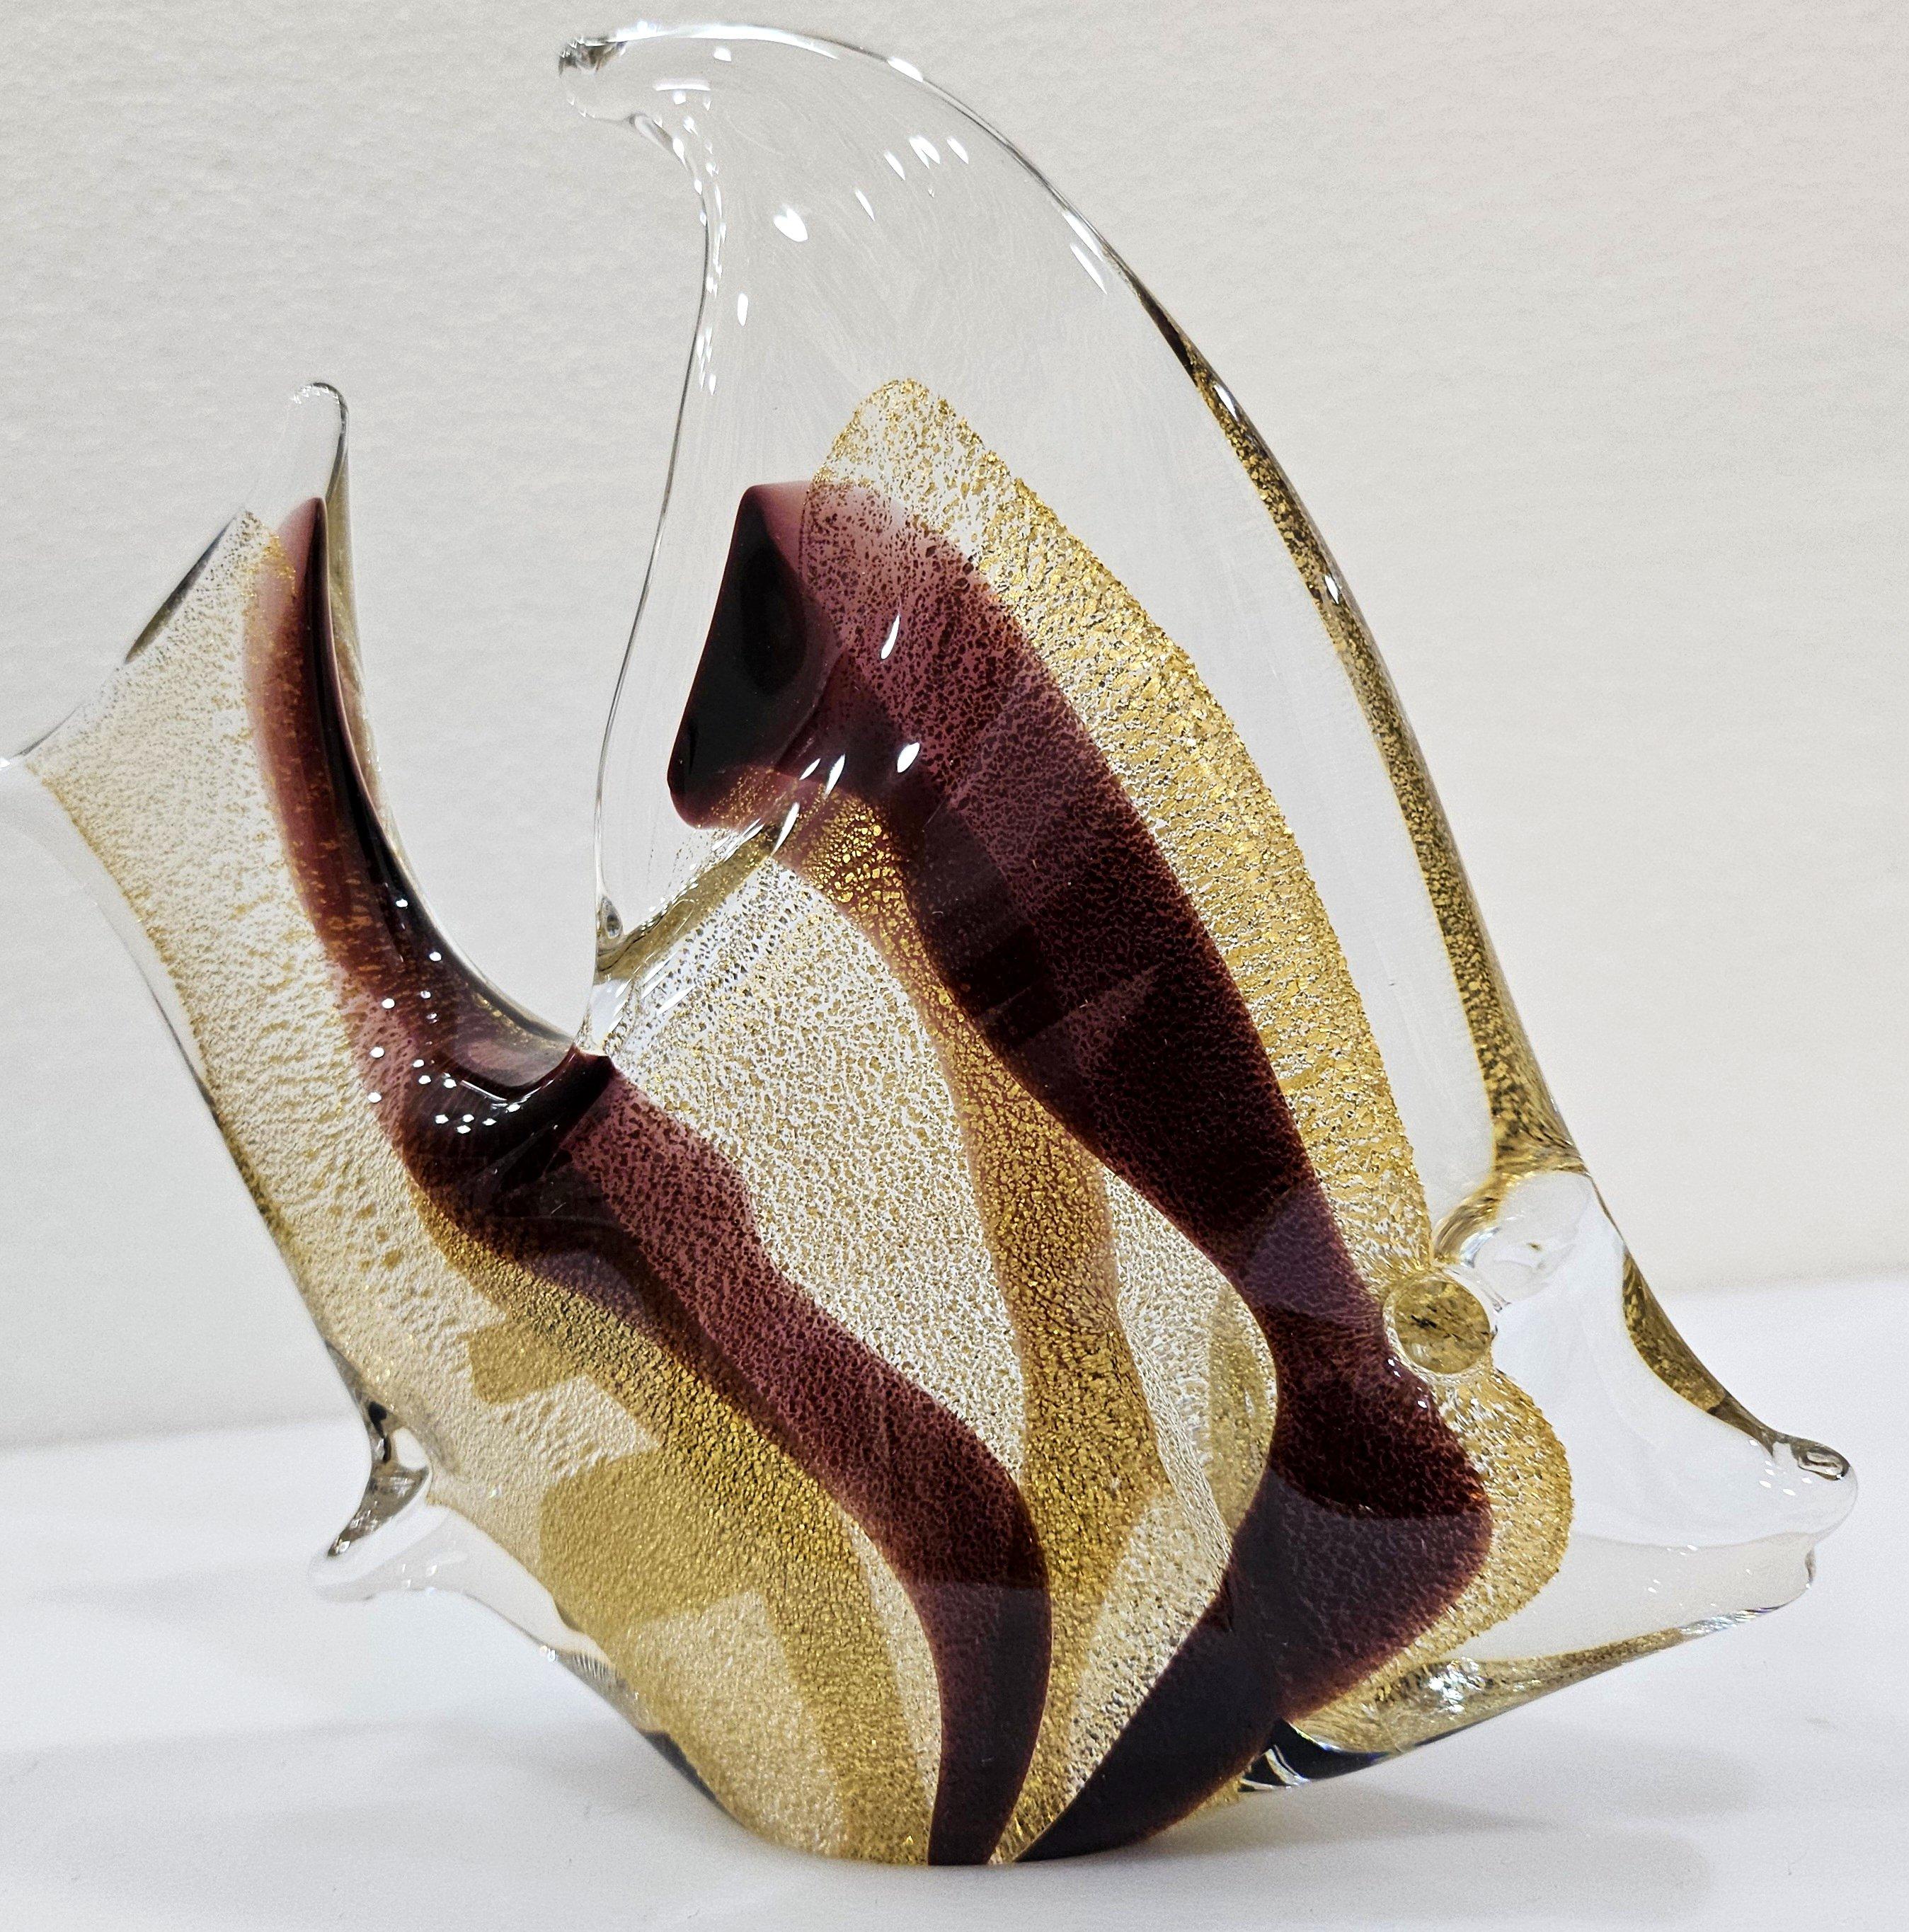 Signed, 24k gold infused, Glass Fish Sculpture by Josef Marcolin.
In addition to the signature on the bottom, the piece has both of its original labels as well.  
In Murano glass work, gold inclusions in the glass are typically called gold polveri.